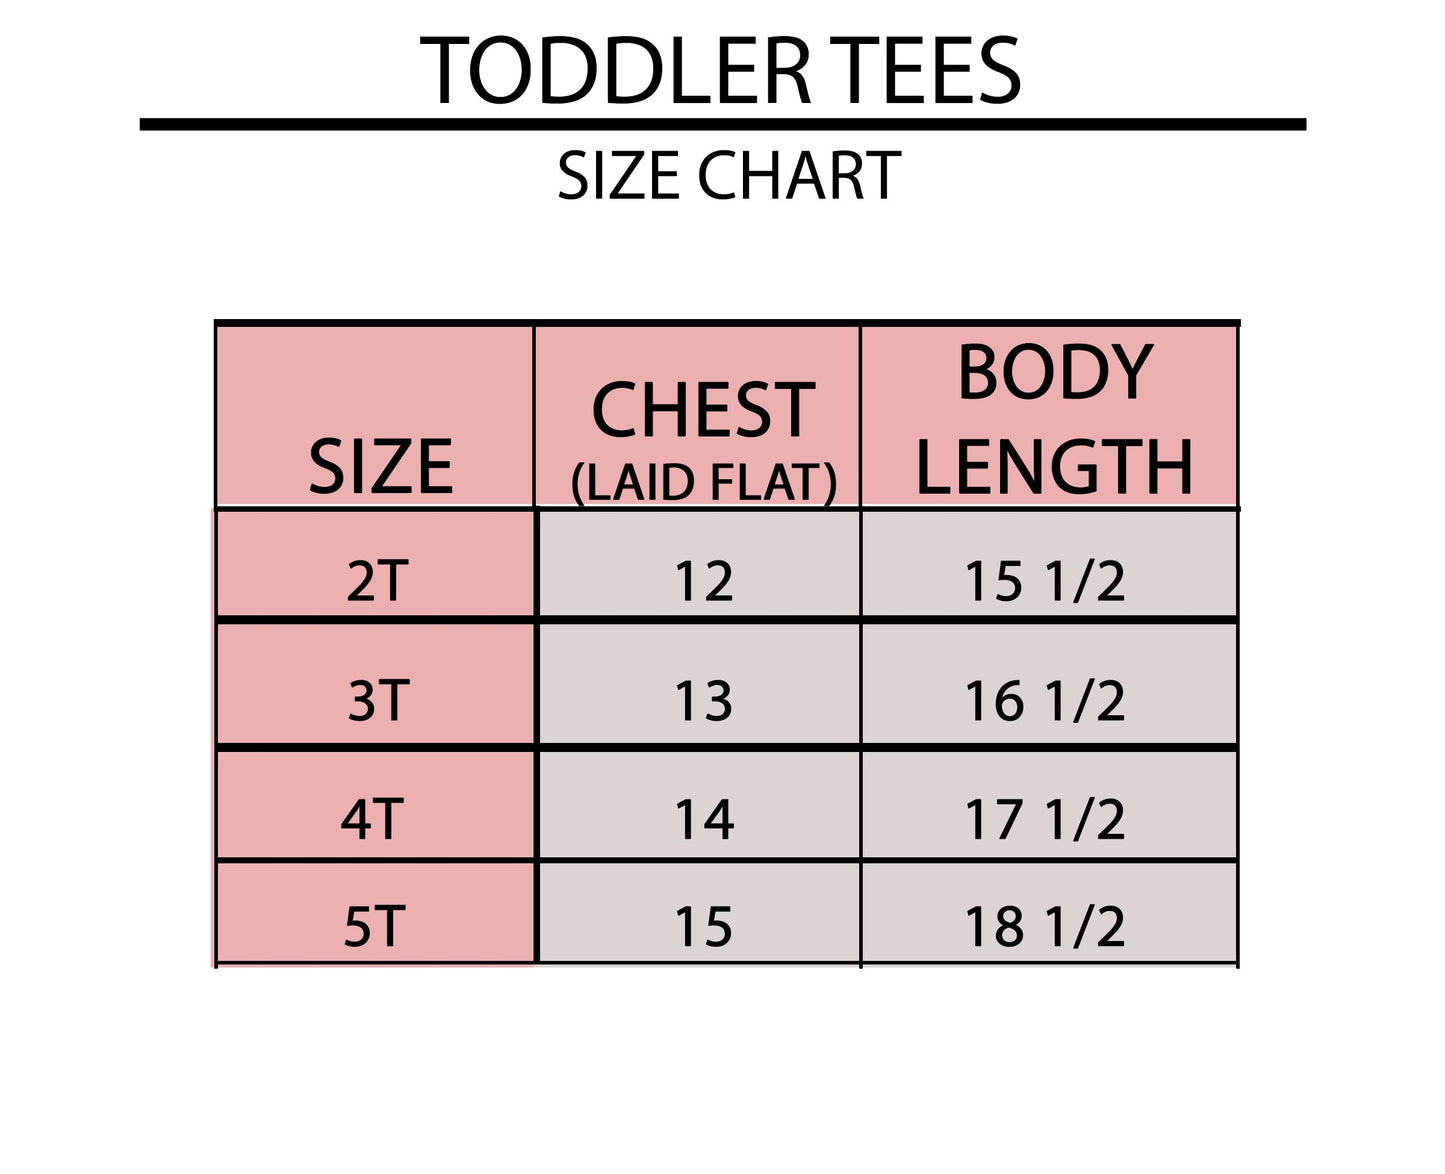 Jolly Mini Colorful | Toddler Short Sleeve Crew Neck